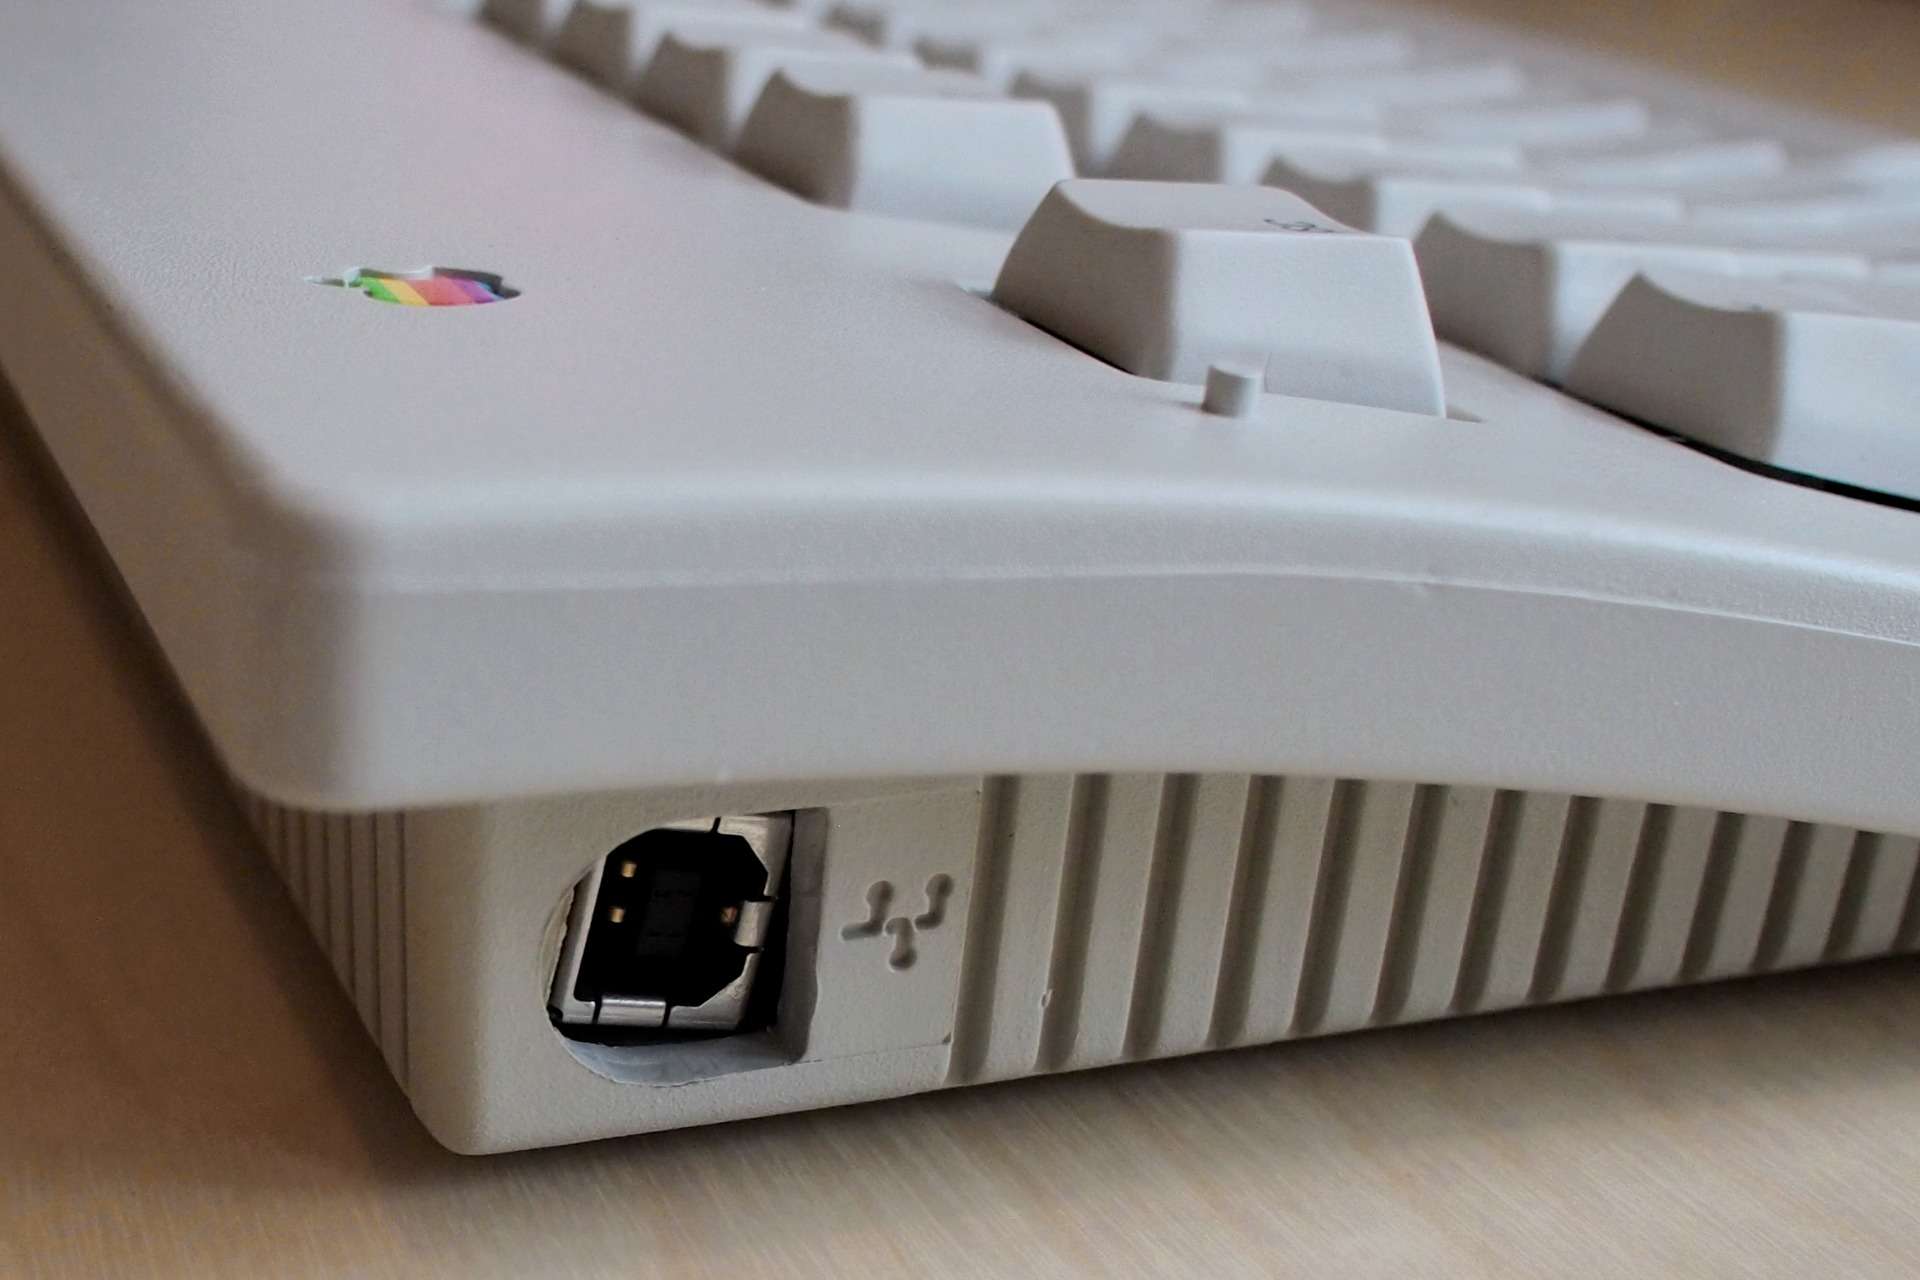 The Apple Extended Keyboard II might be Cupertino's finest keyboard of all time.